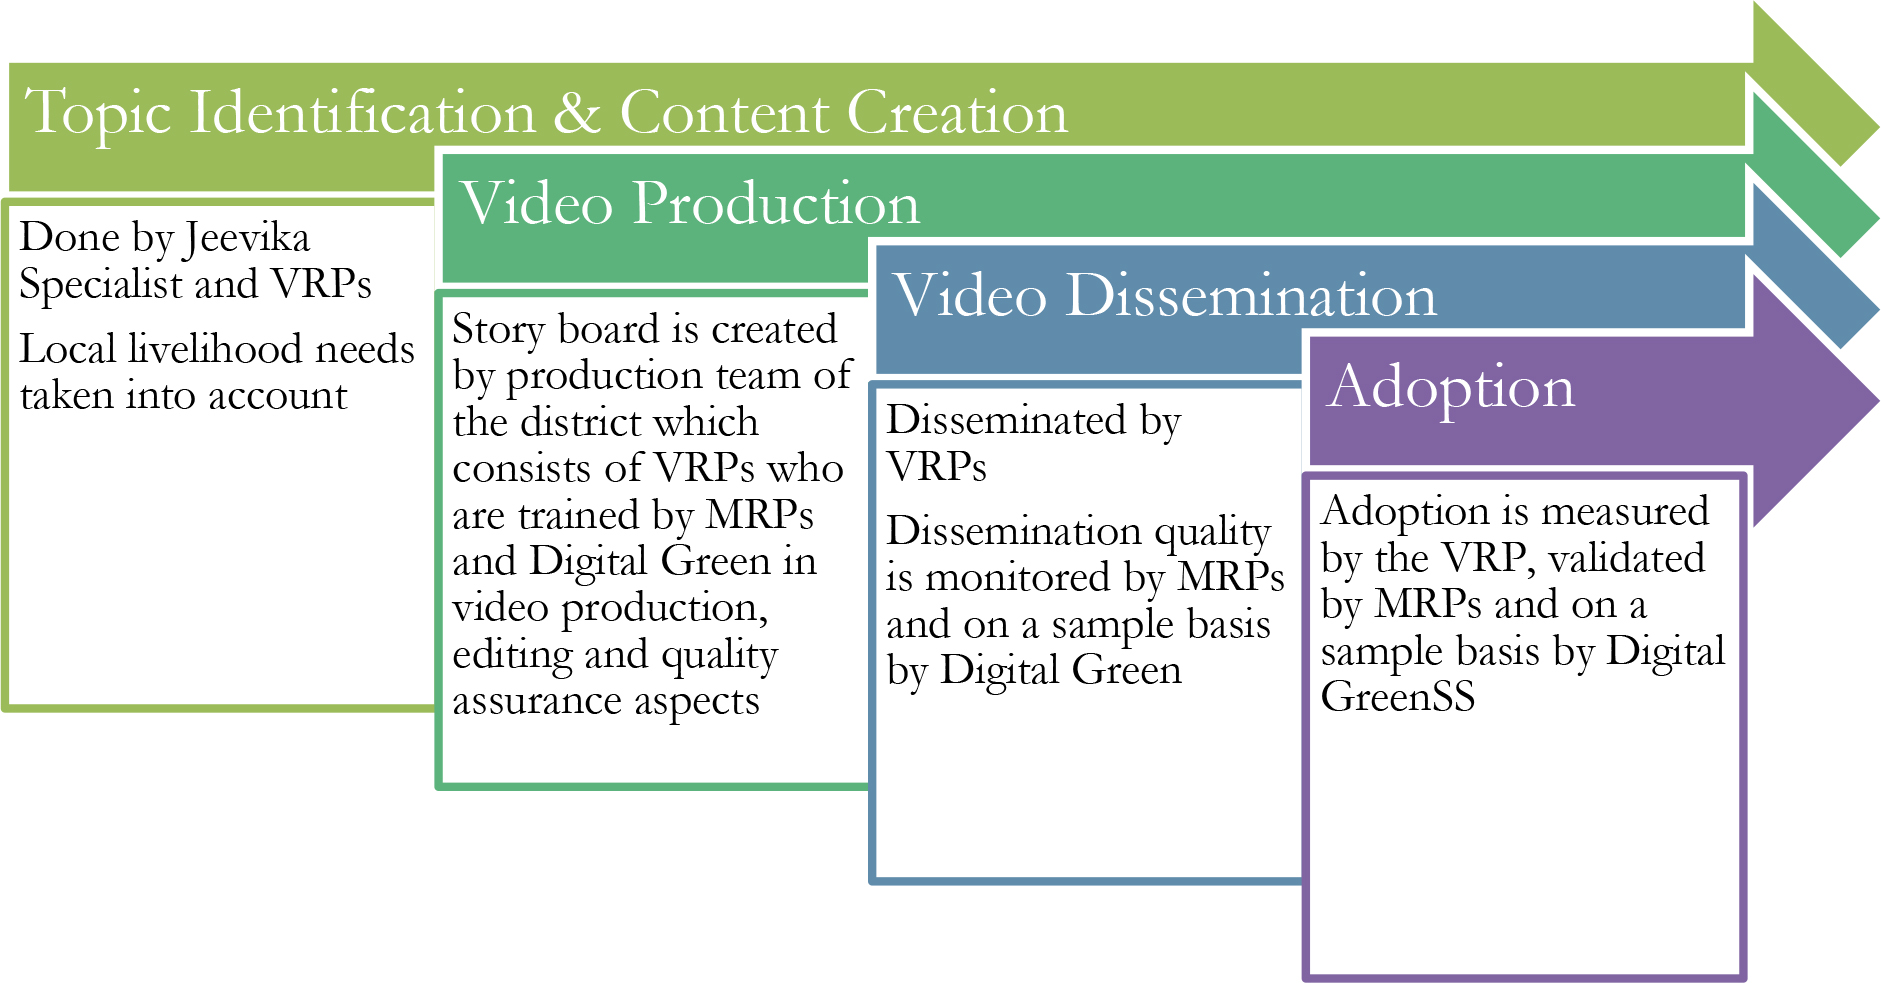 The image shows an illustration of identification, creation, production, dissemination and adoption of video creation process.